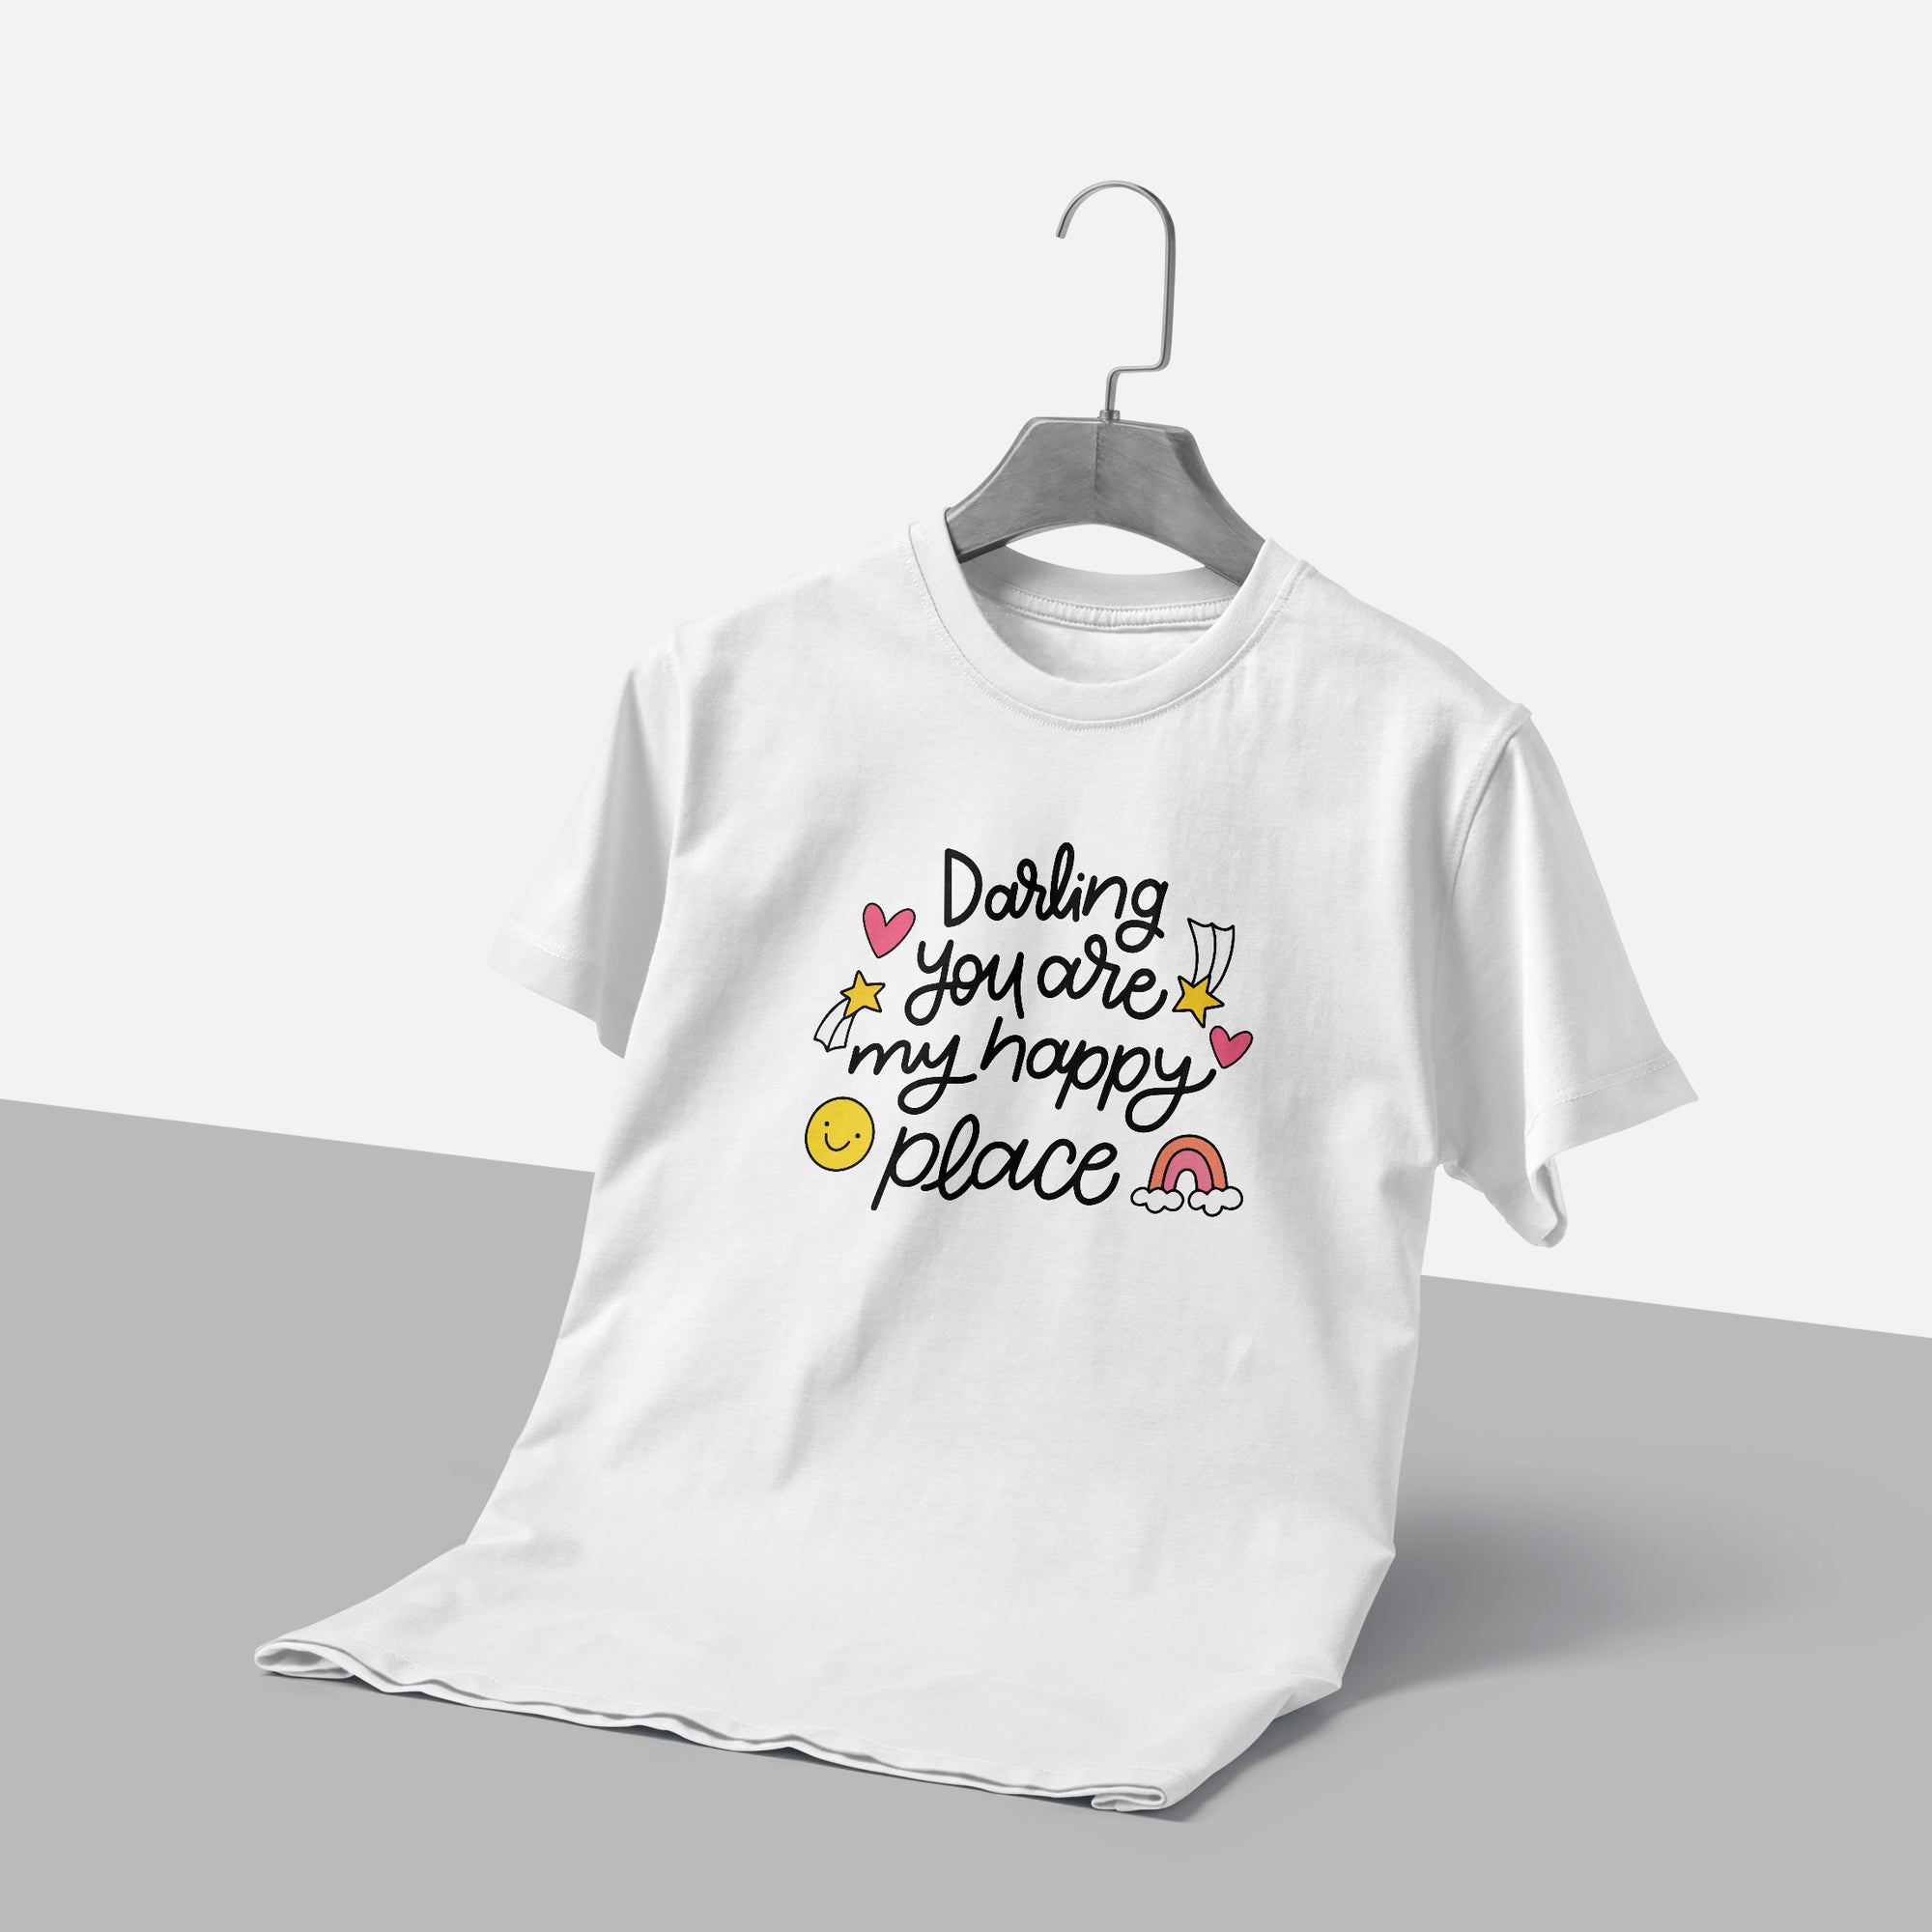 Affectionate Message T-Shirt "Darling You Are My Happy Place"